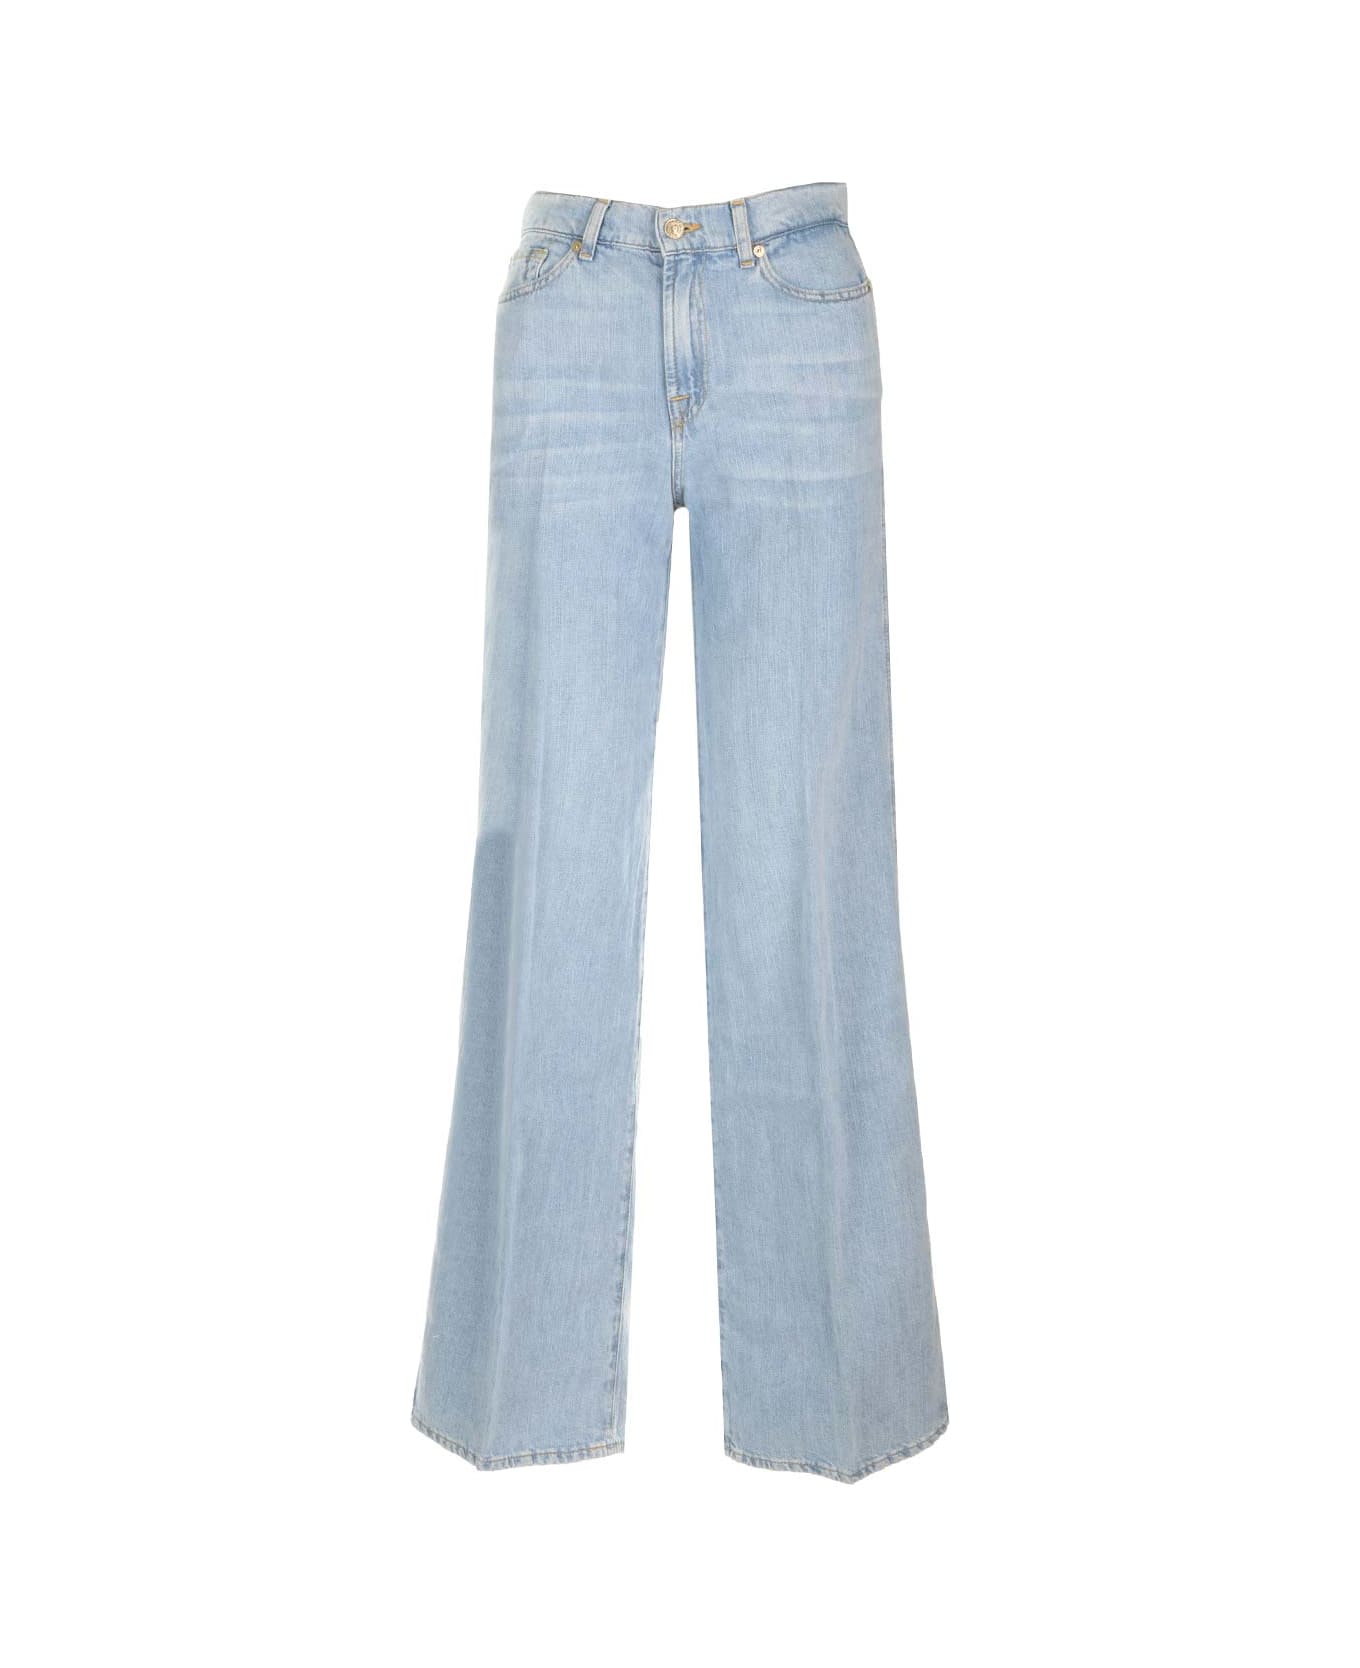 7 For All Mankind Light Blue 'lotta' Jeans - Clear Blue デニム